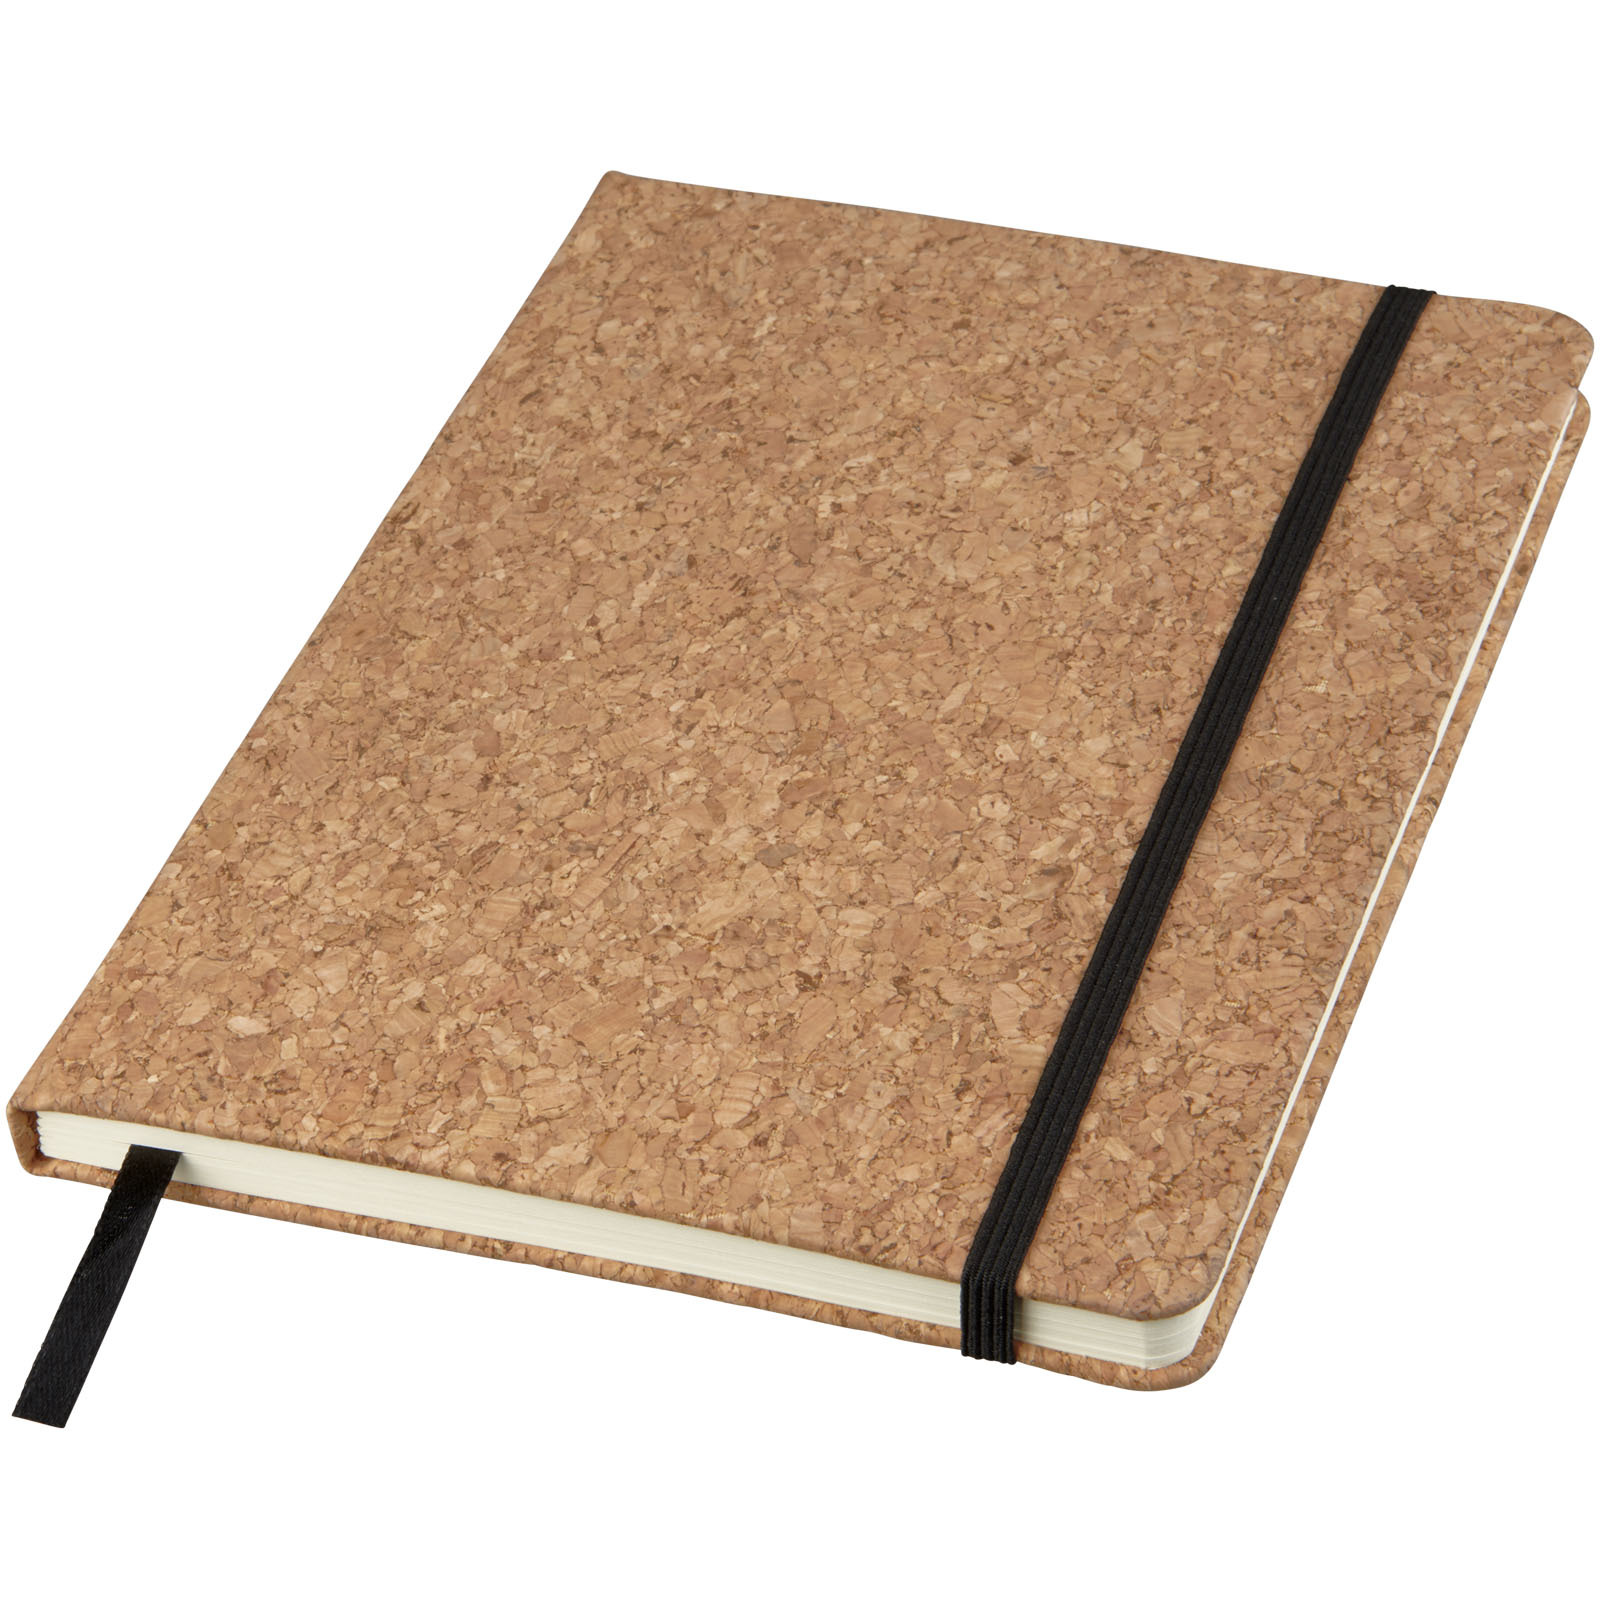 Advertising Hard cover notebooks - Napa A5 cork notebook - 0